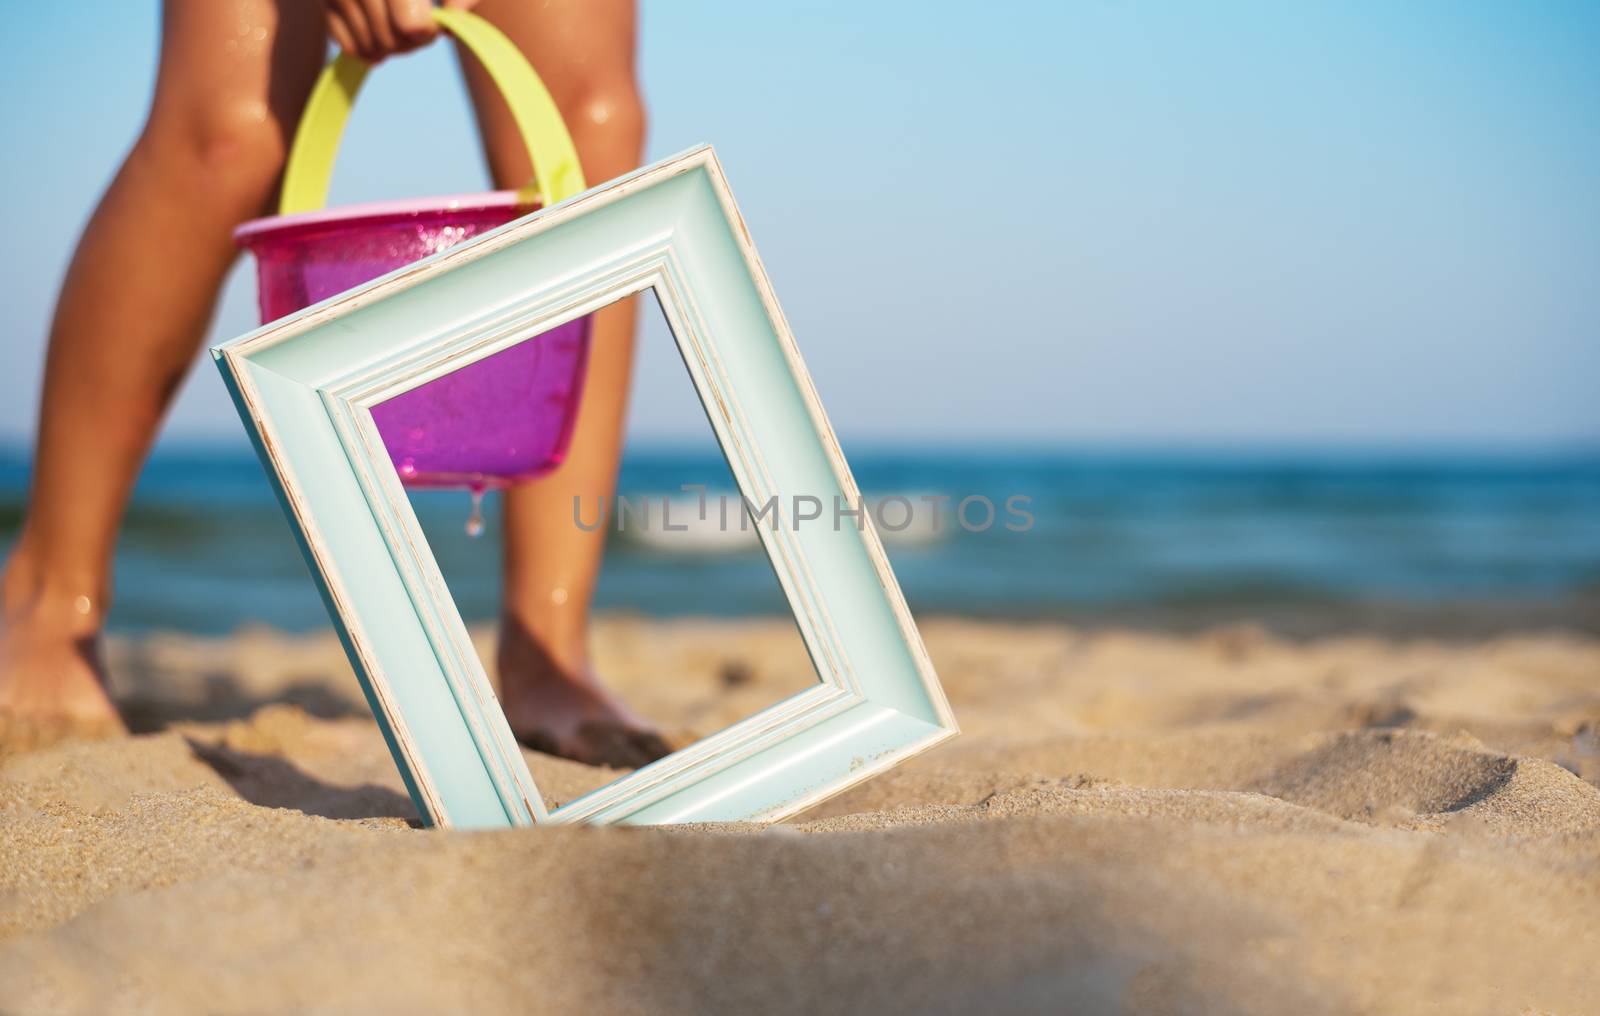 Wooden picture frame on the beach sand, summer concept. Children play in the sand beach